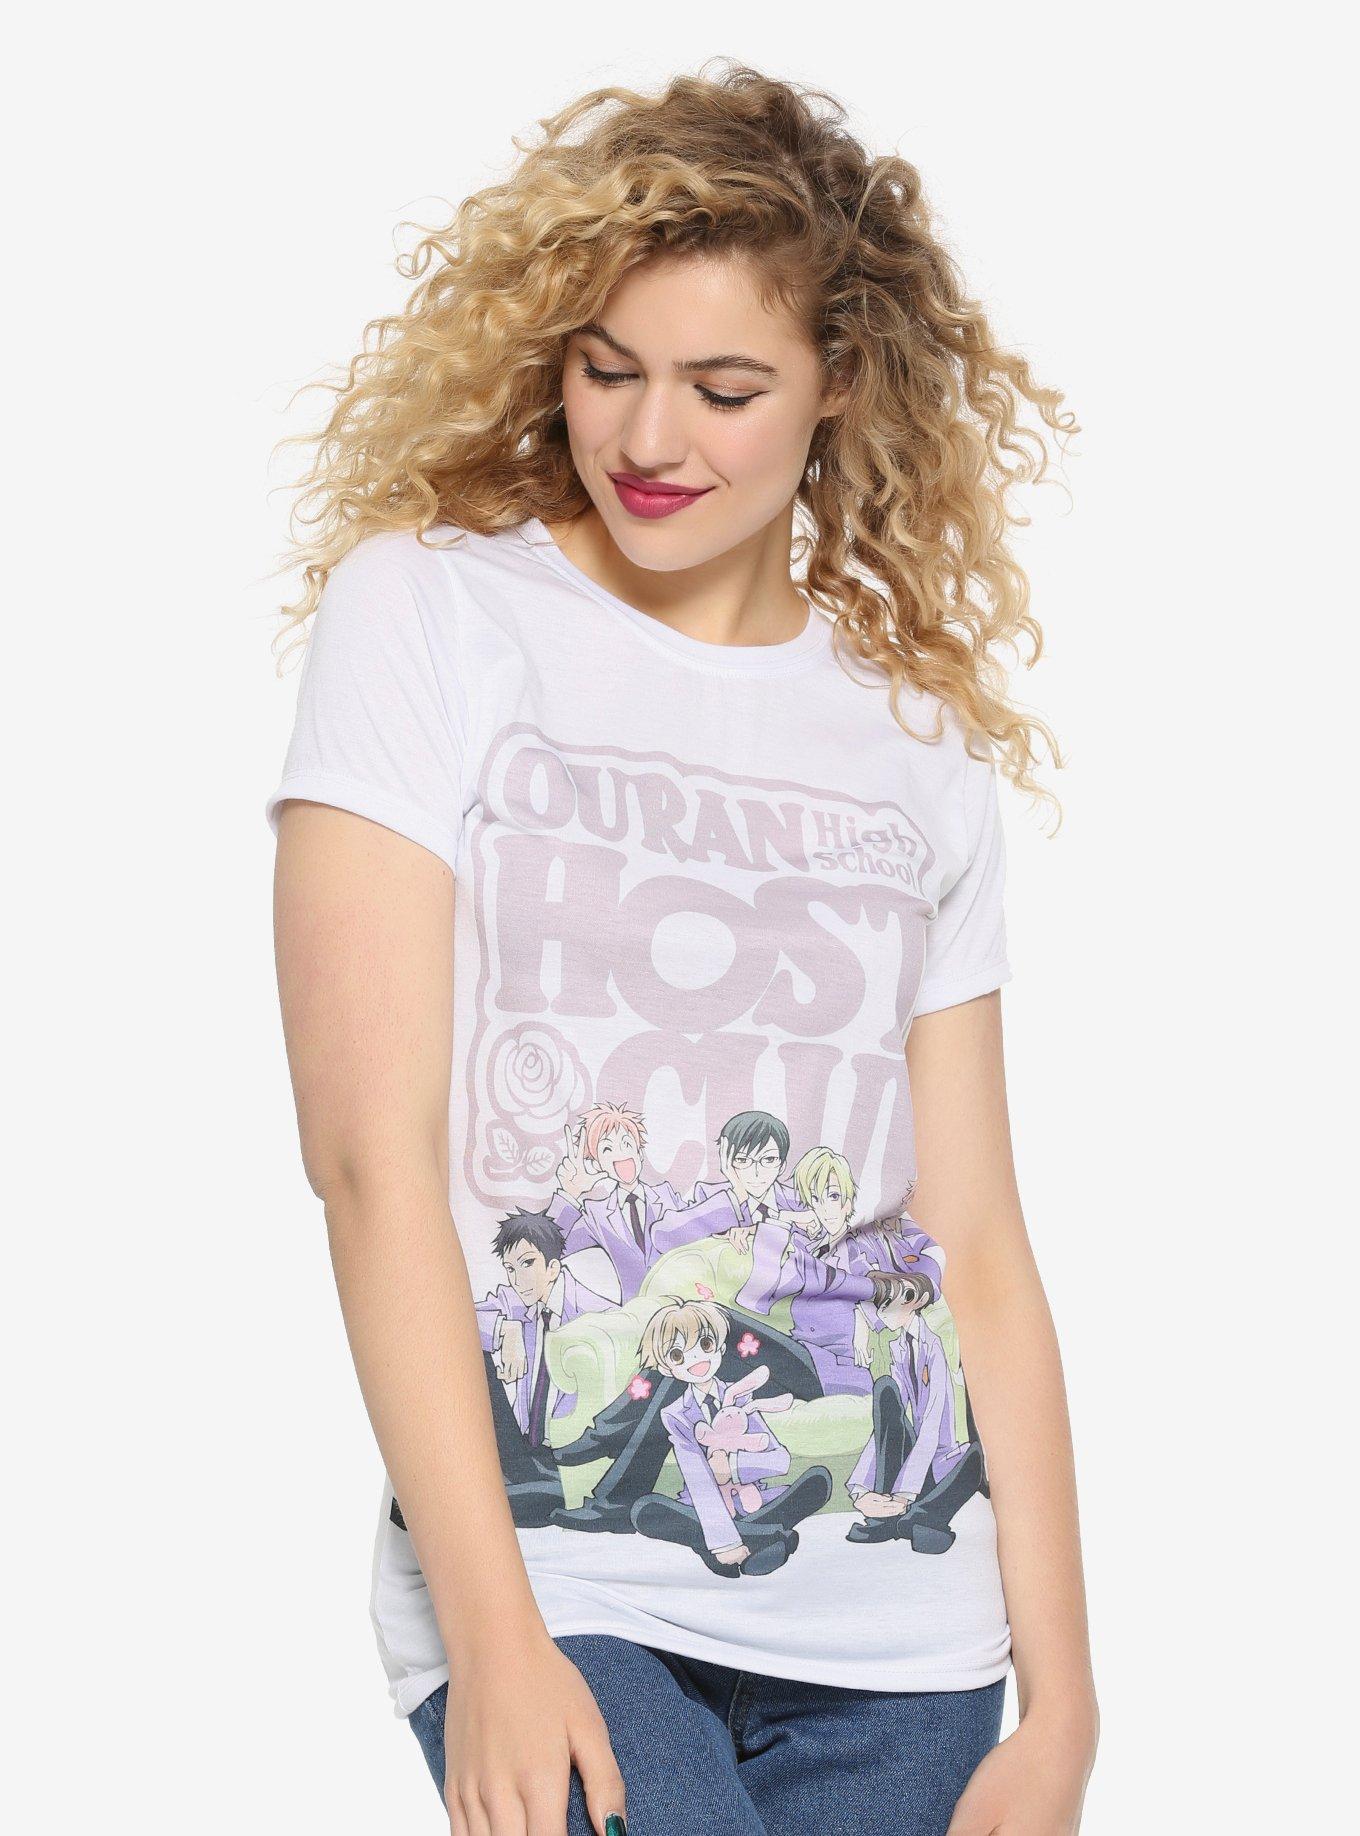 Ouran Host Club Couch Girls T-shirt, LAVENDER, hi-res